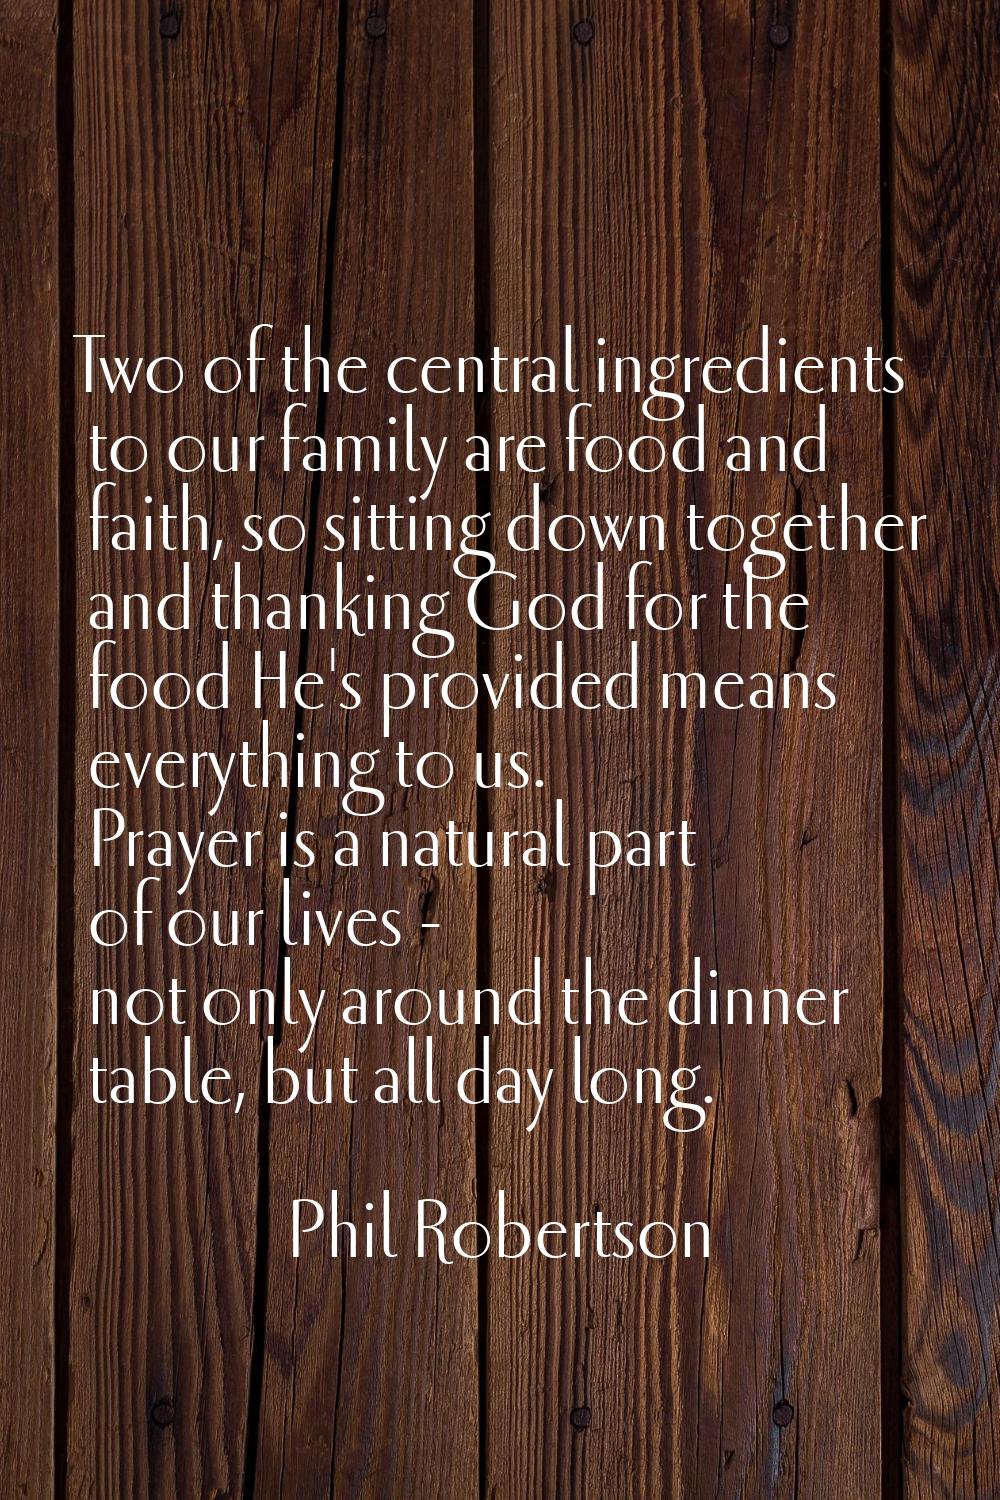 Two of the central ingredients to our family are food and faith, so sitting down together and thank